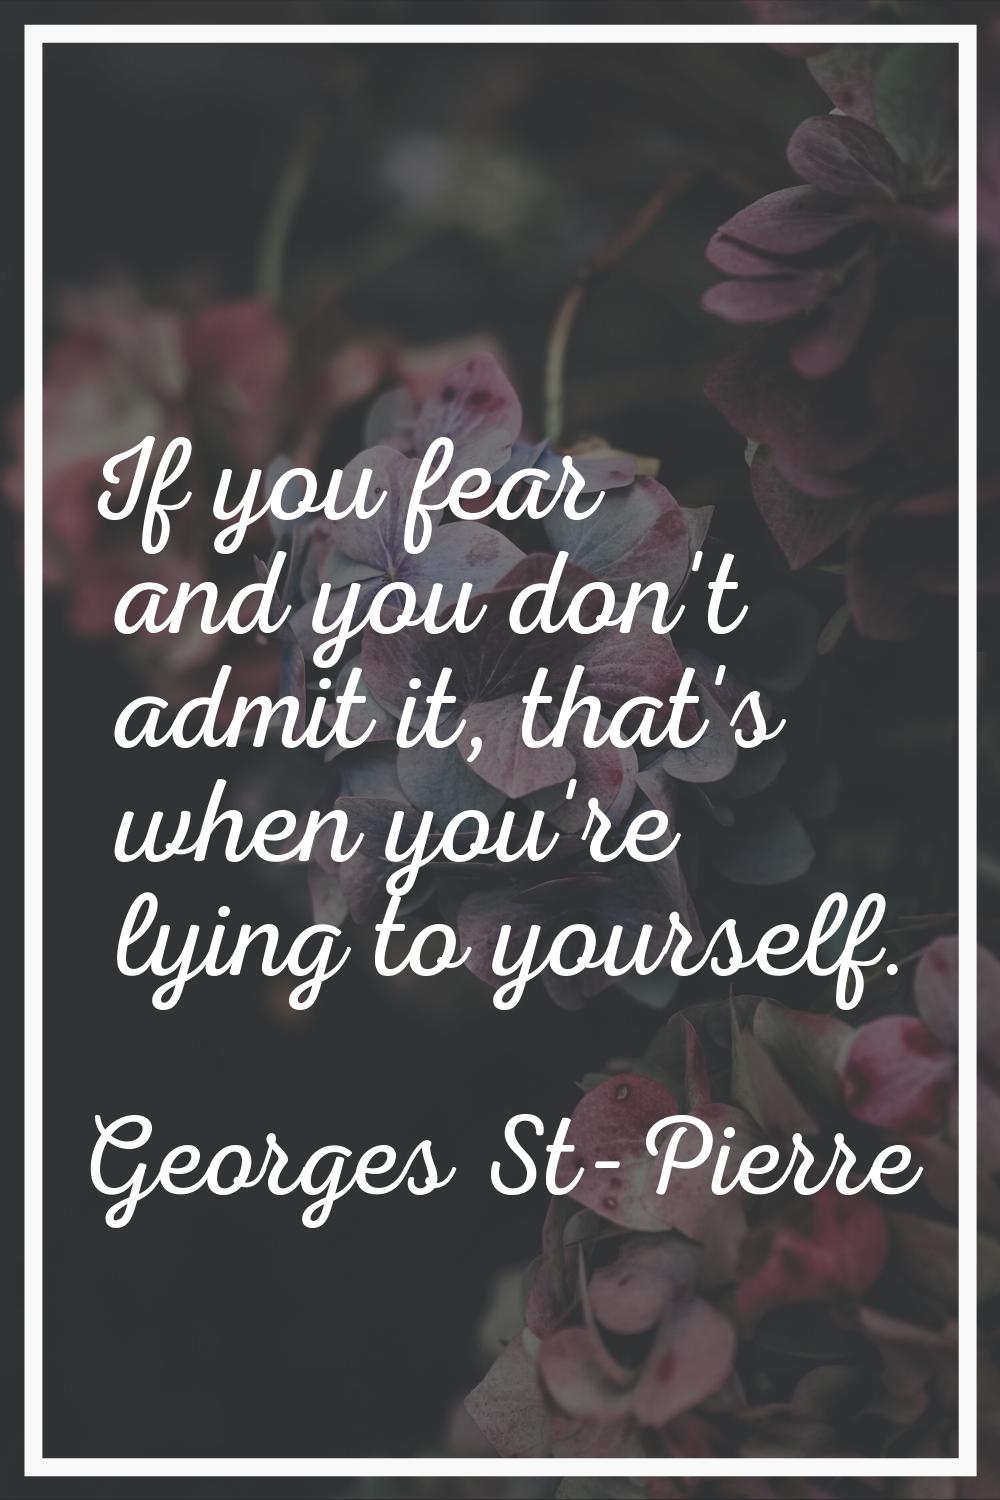 If you fear and you don't admit it, that's when you're lying to yourself.